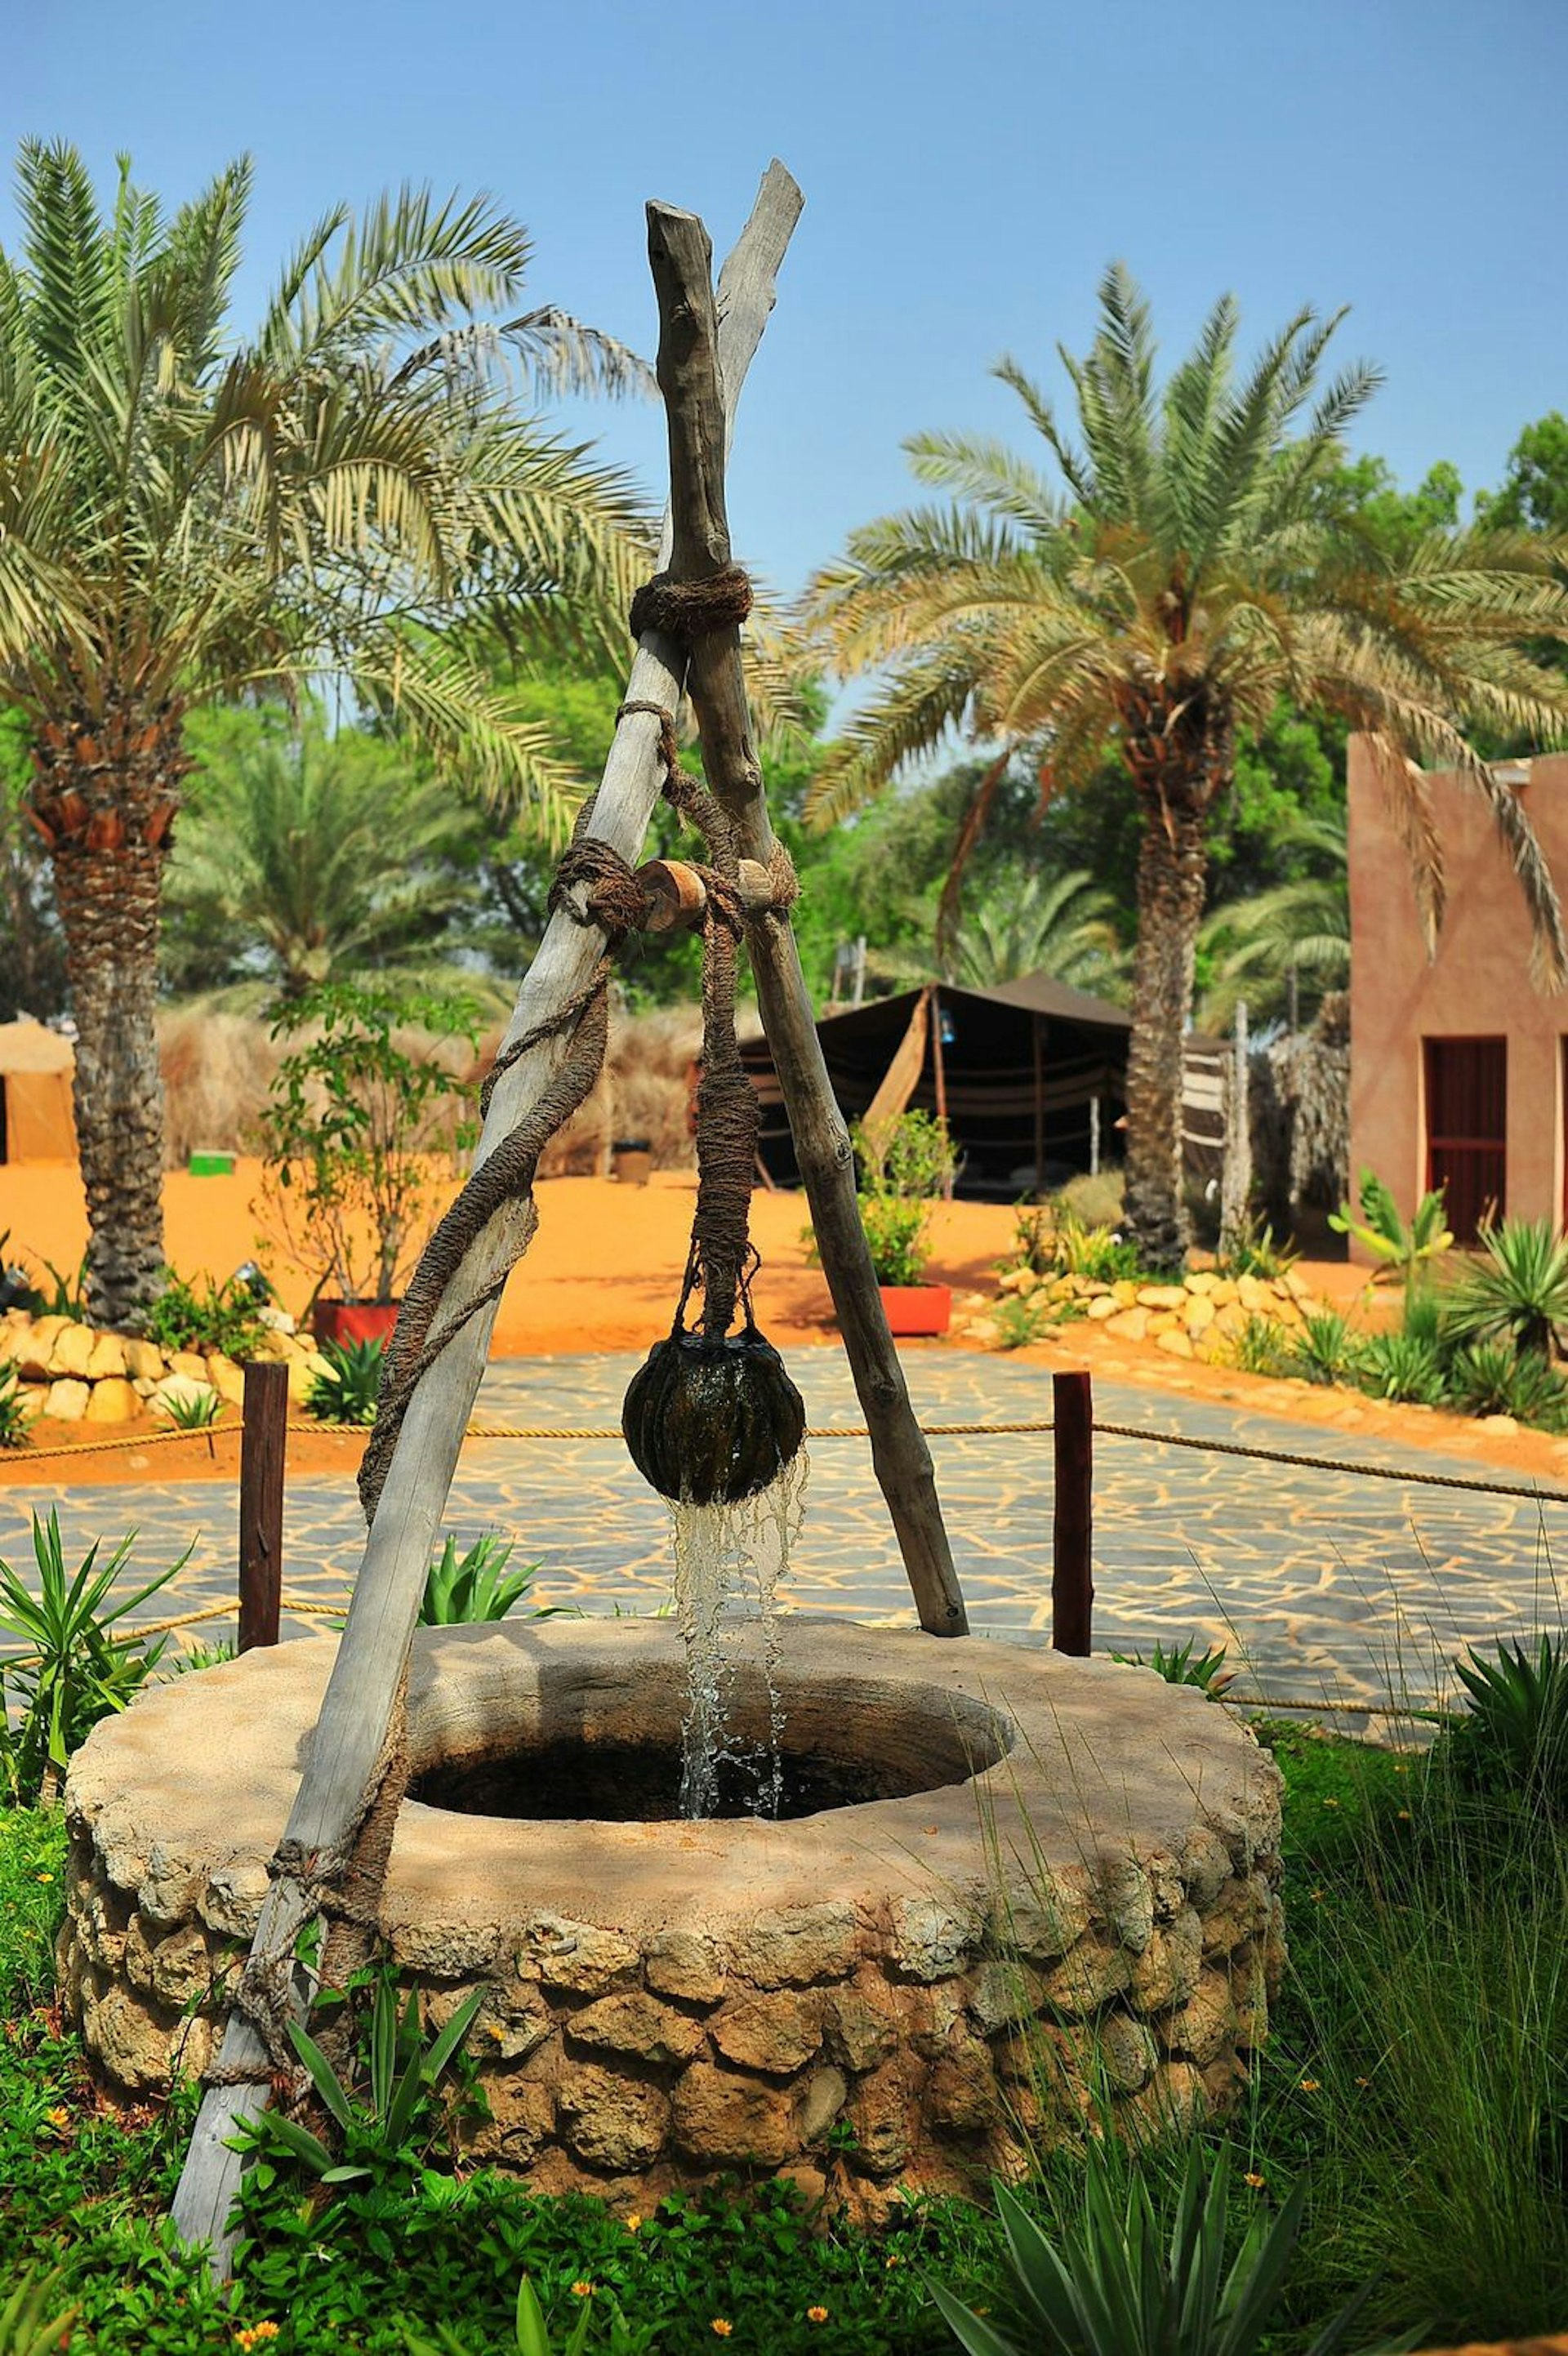 A water well at the Abu Dhabi Heritage Village, United Arab Emirates